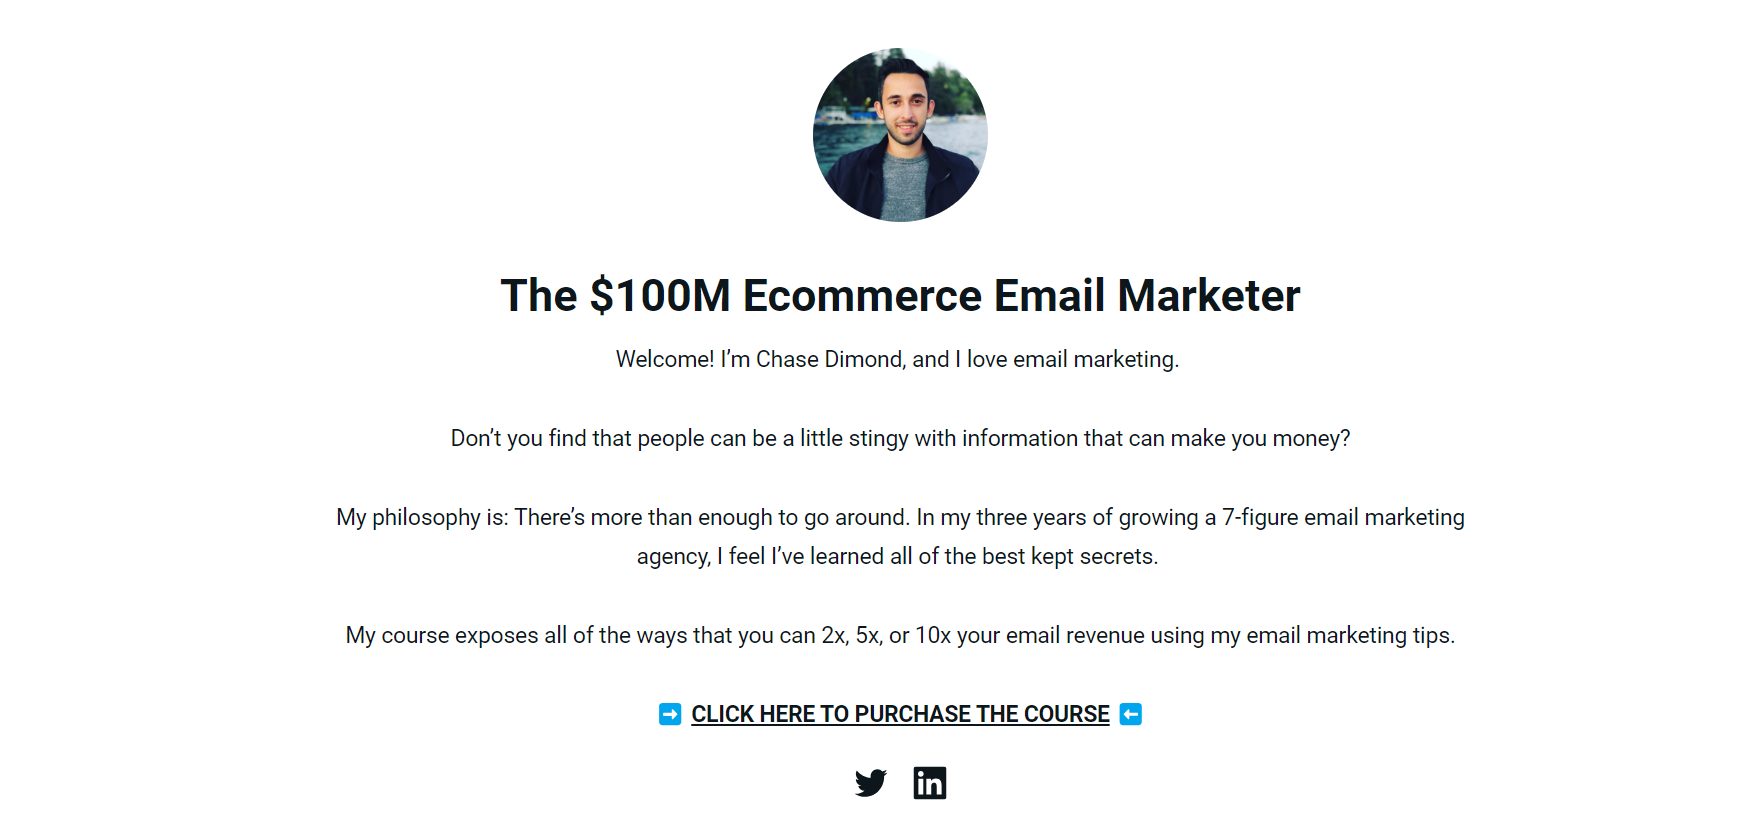 Chase Dimond Ecommerce Email Marketer